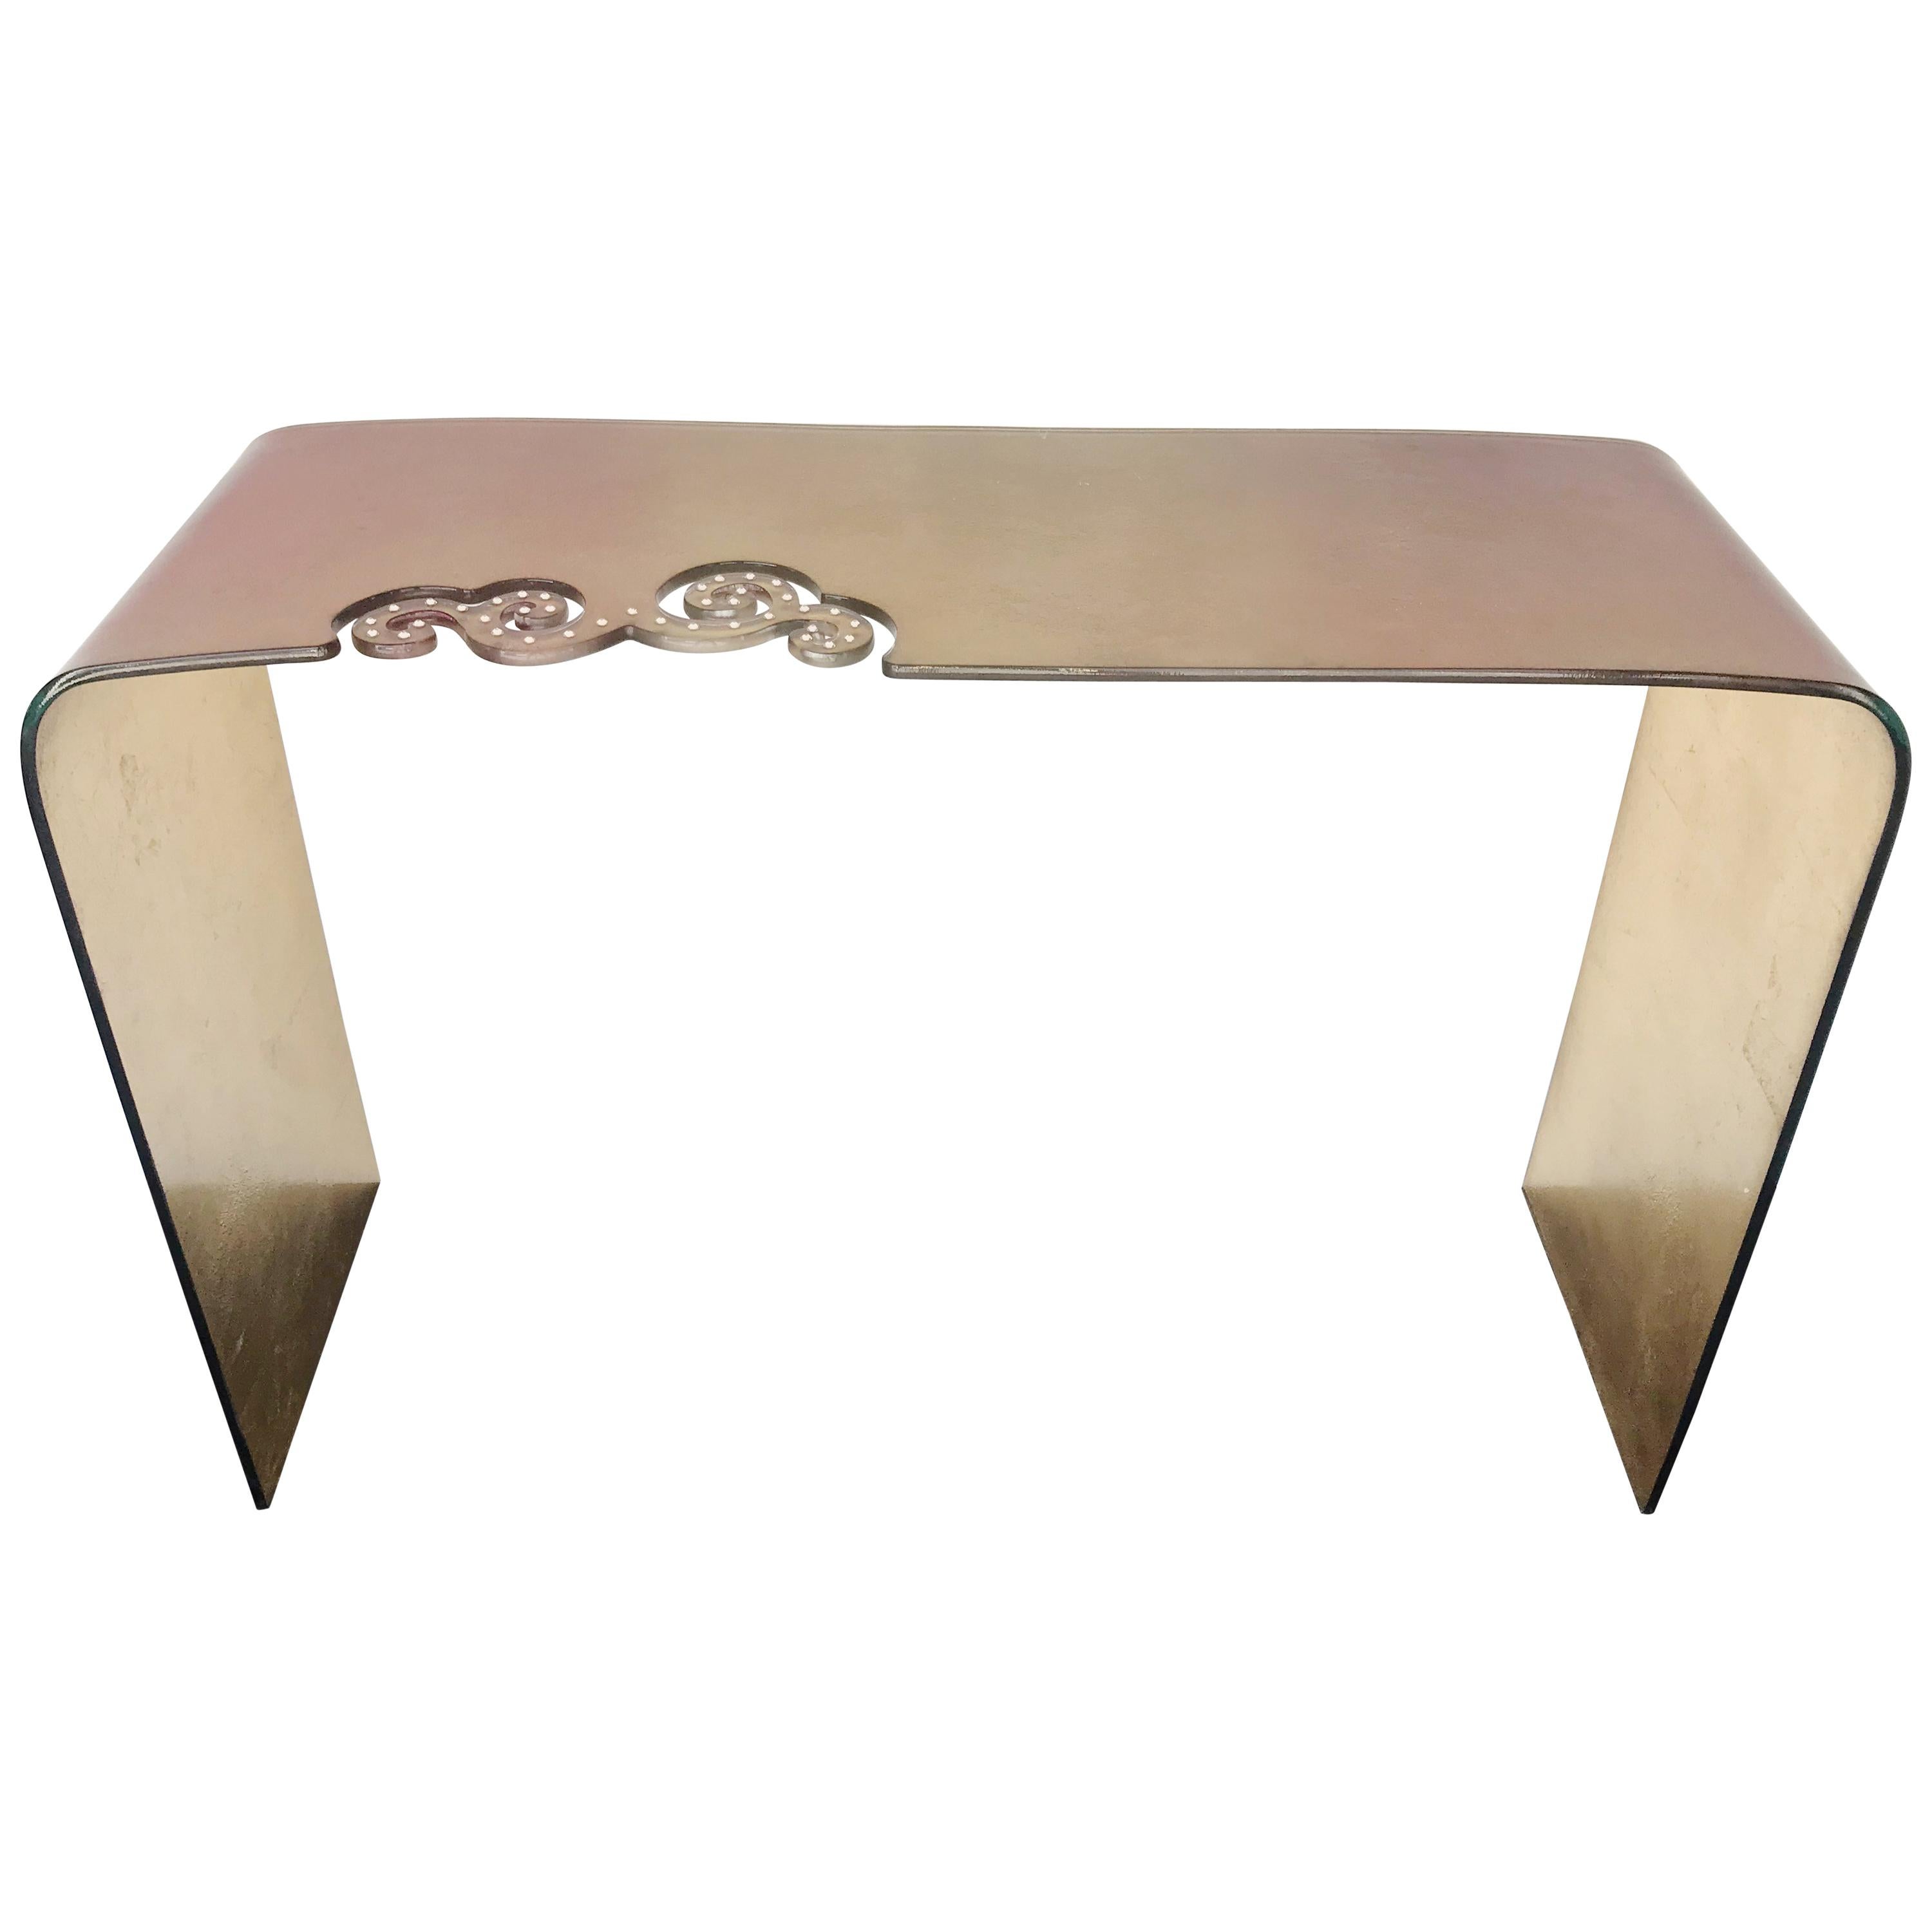 Gold Fuchsia Glass Console Table with Swarovski Crystals FINAL CLEARANCE SALE